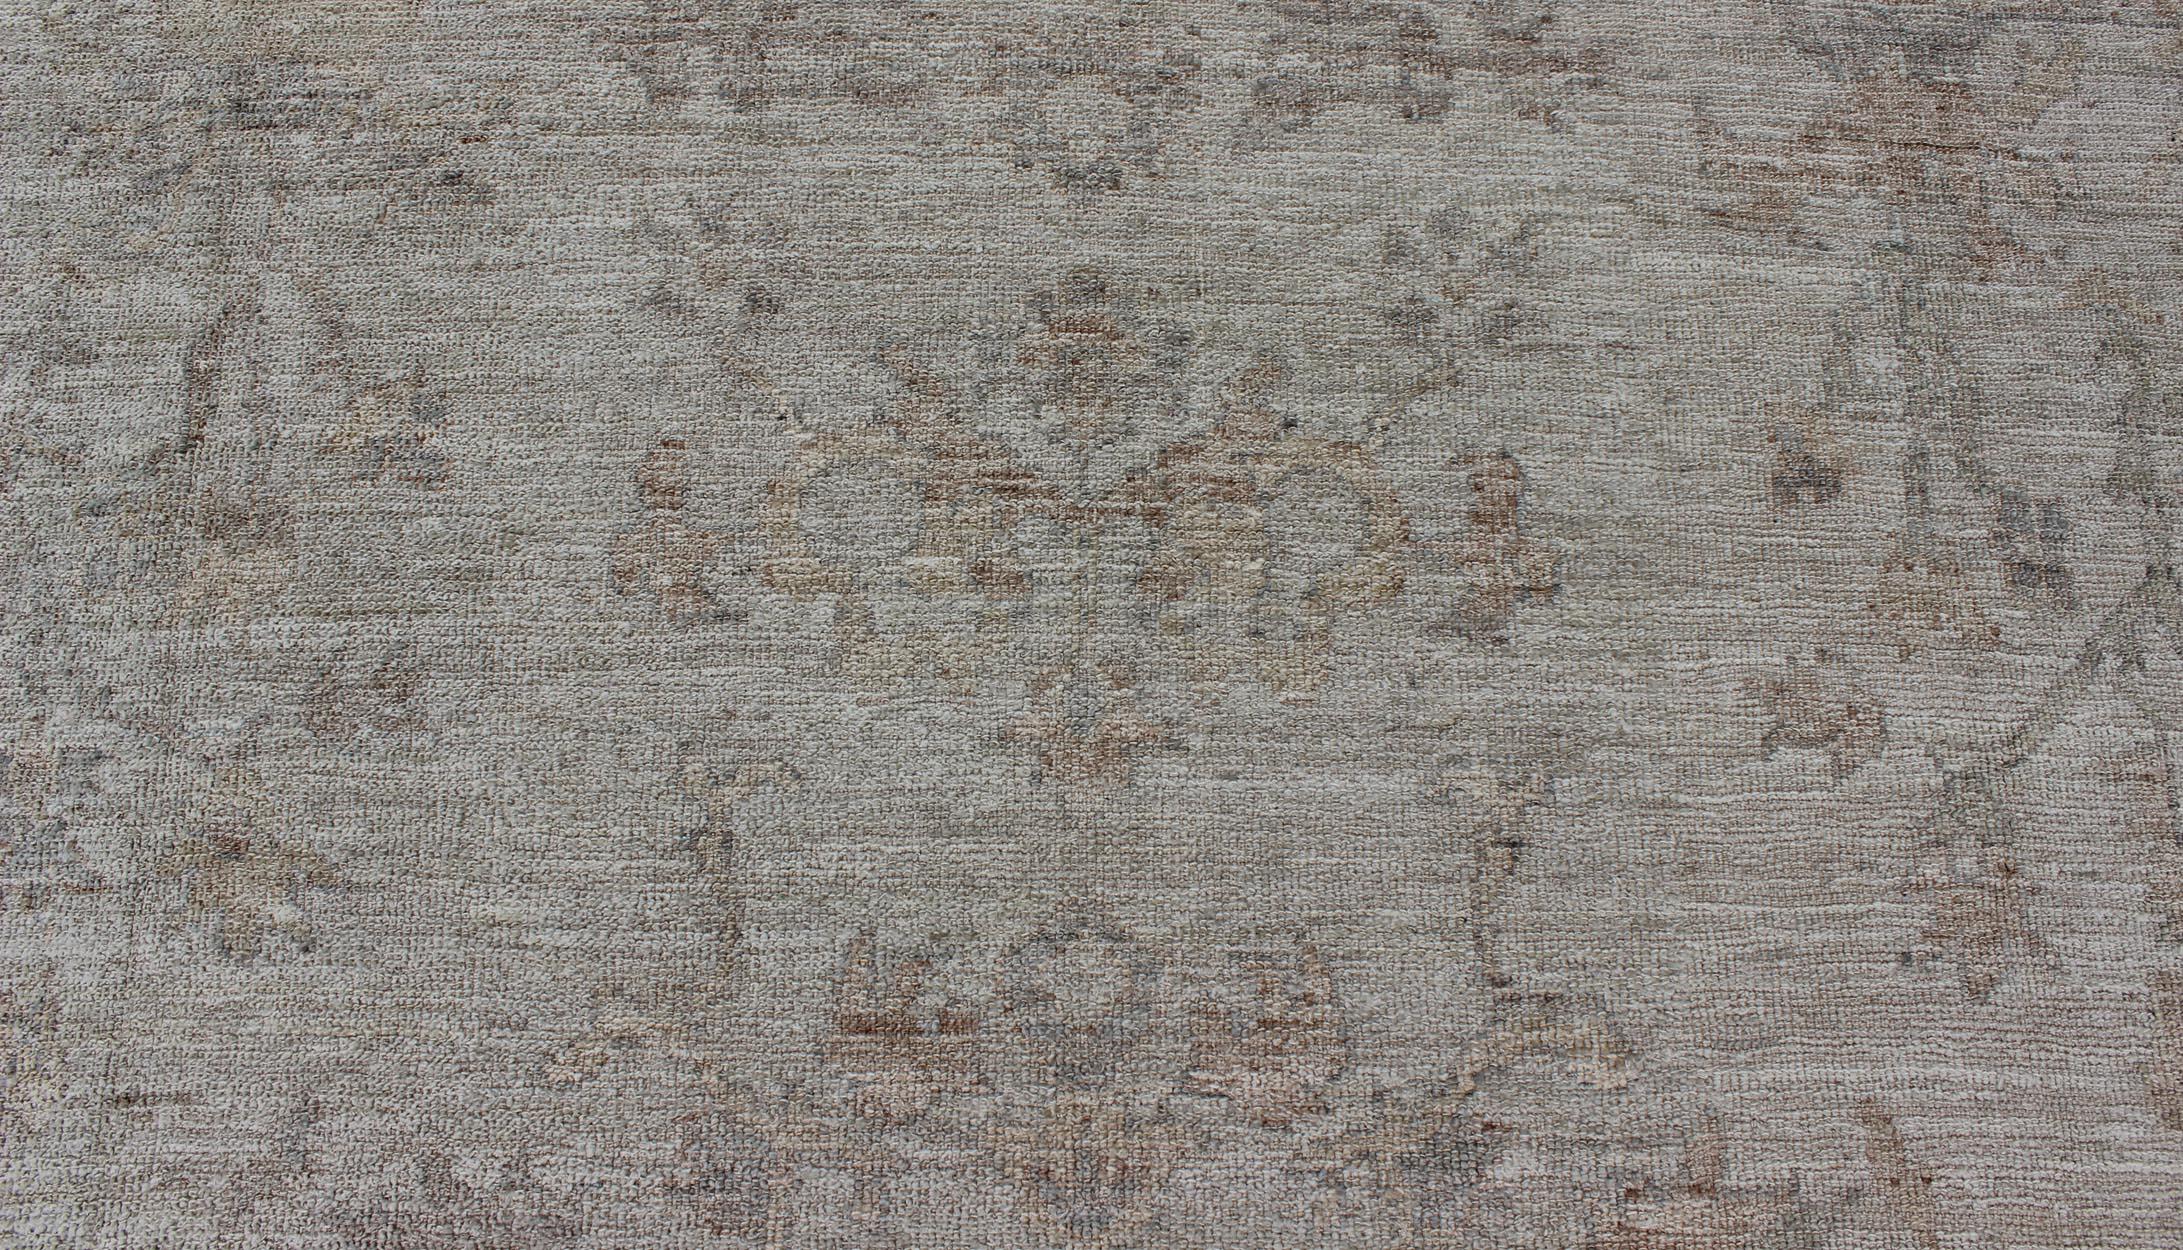 Large Angora Oushak Turkish Rug in Cream, Taupe, Silver, and Hints of Faded Blue For Sale 4